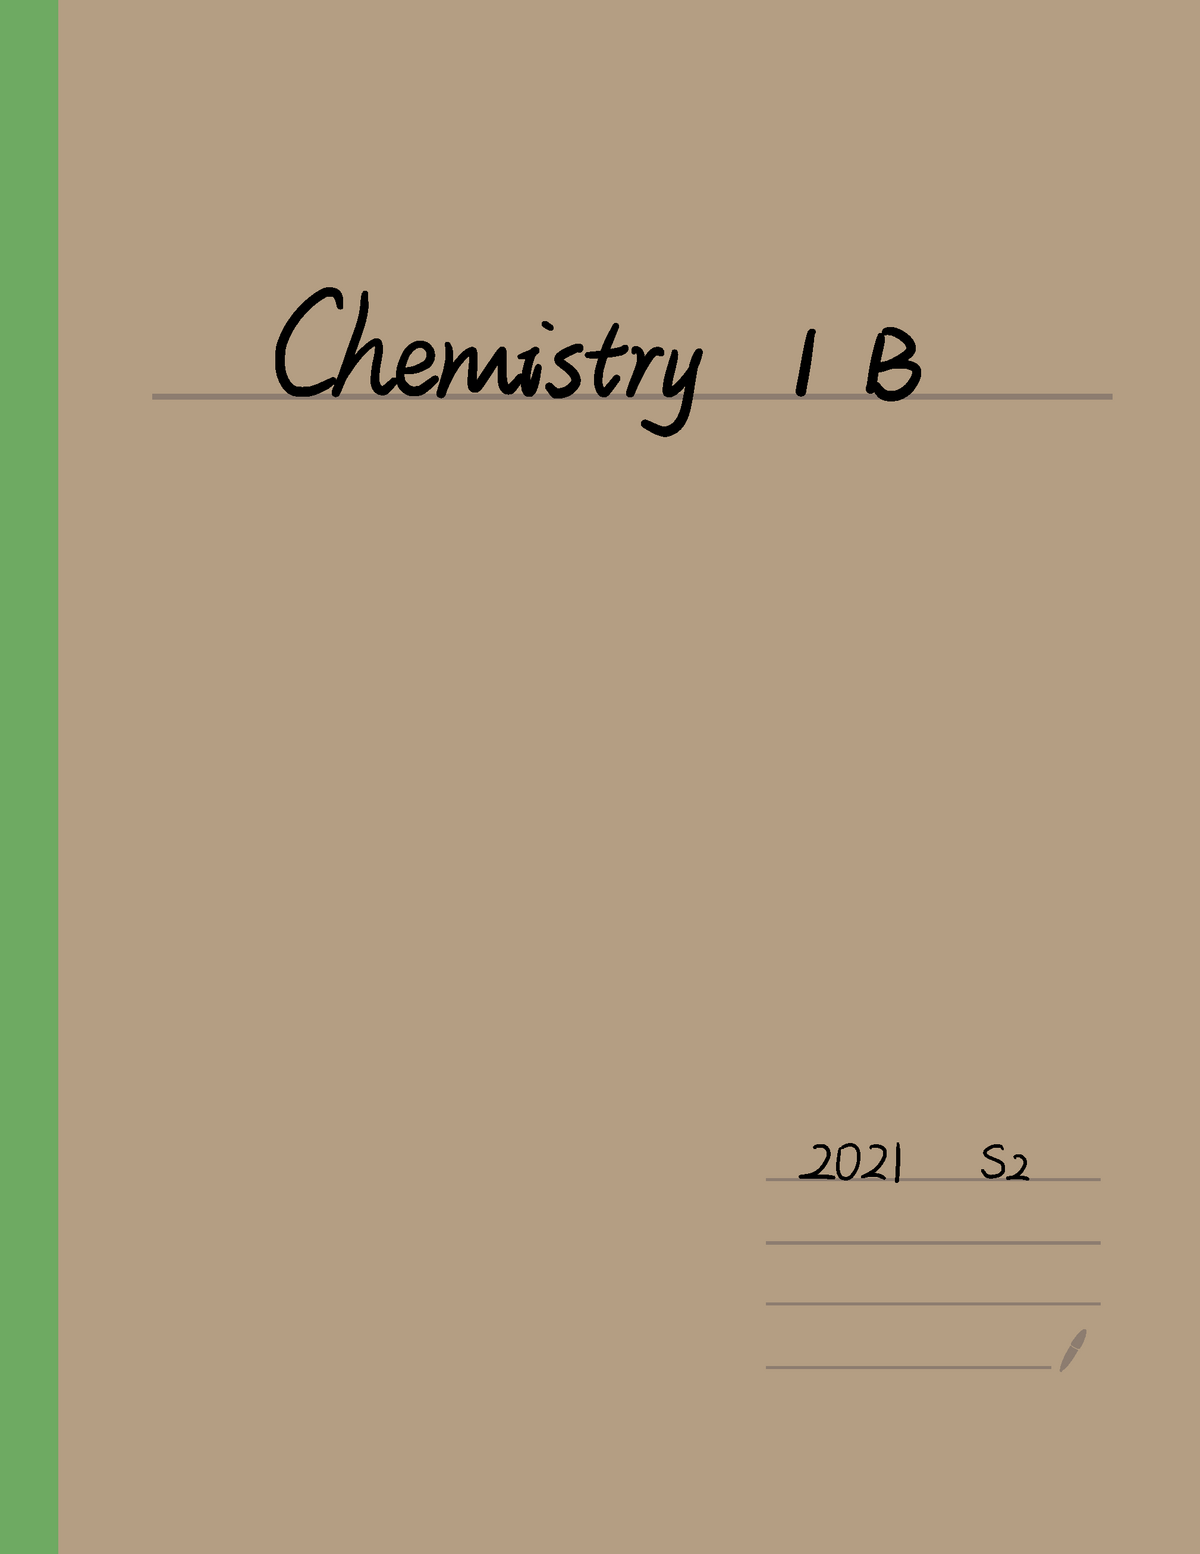 1012-lecture-notes-chemistry-i-b-2021-52-lec-1-valence-c-4-n-3-0-h